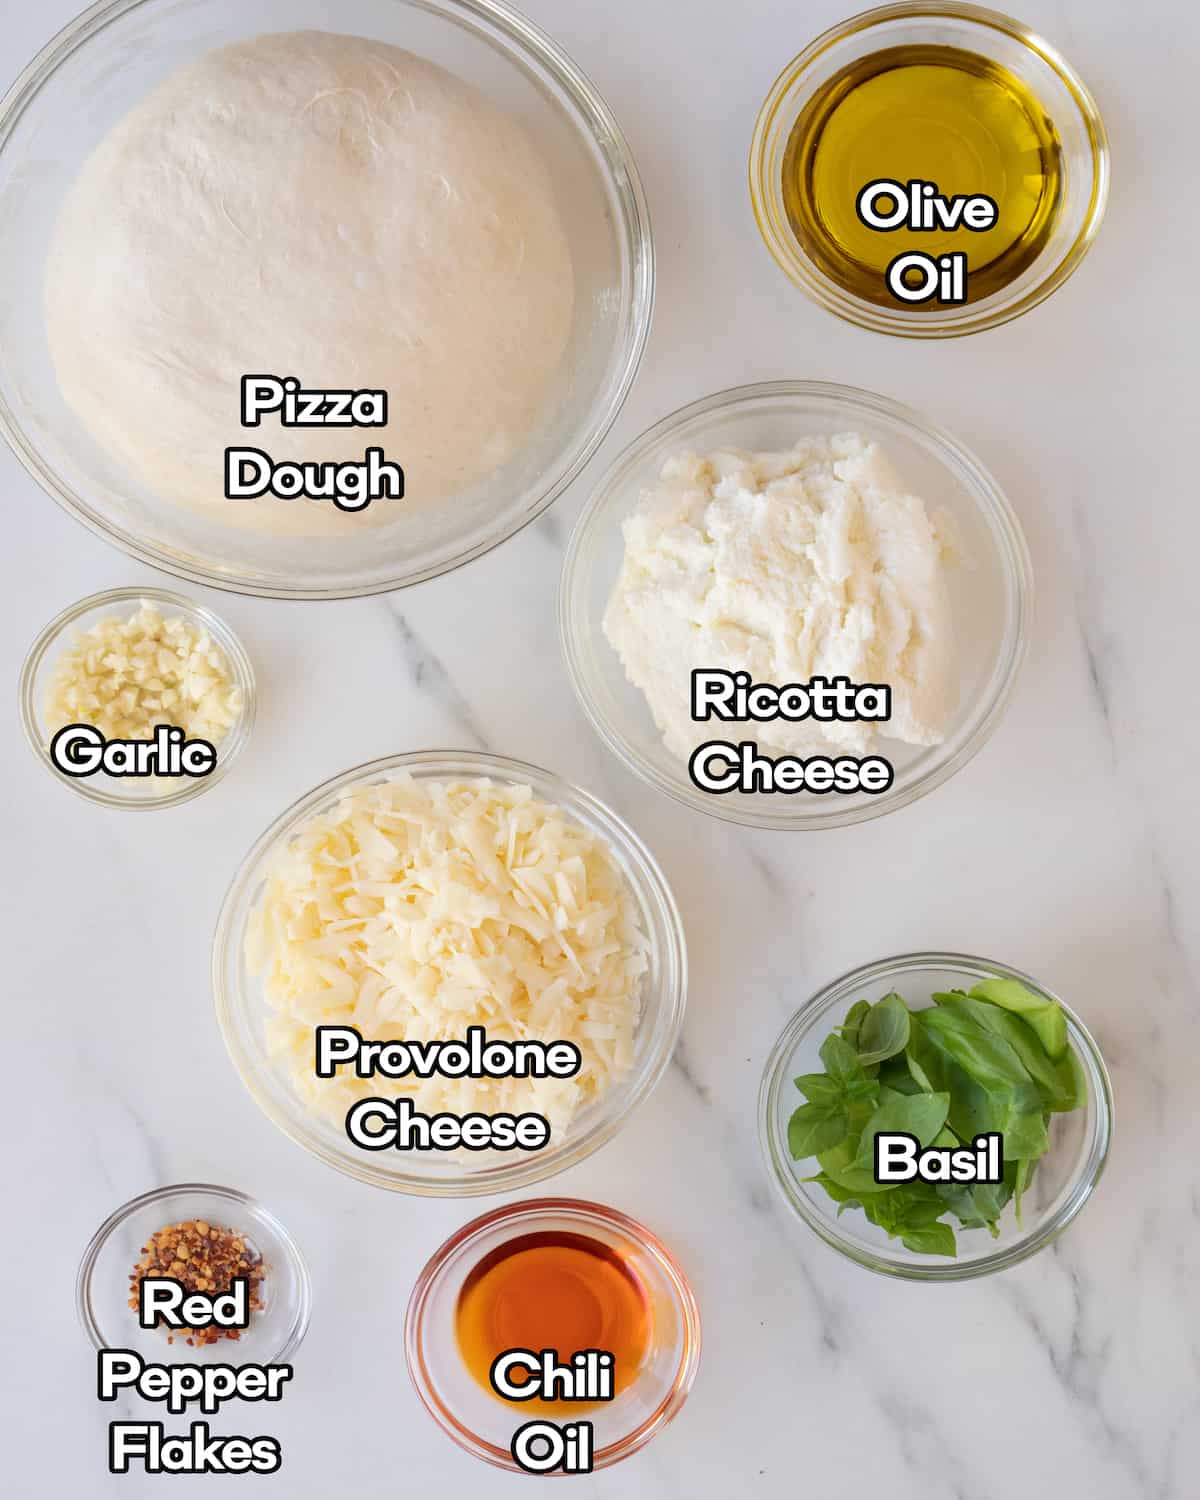 Ingredient shot of ingredients in individual clear bowls including red pepper flakes, basil leaves, chili oil, provolone, and ricotta cheese, garlic, pizza dough, and olive oil